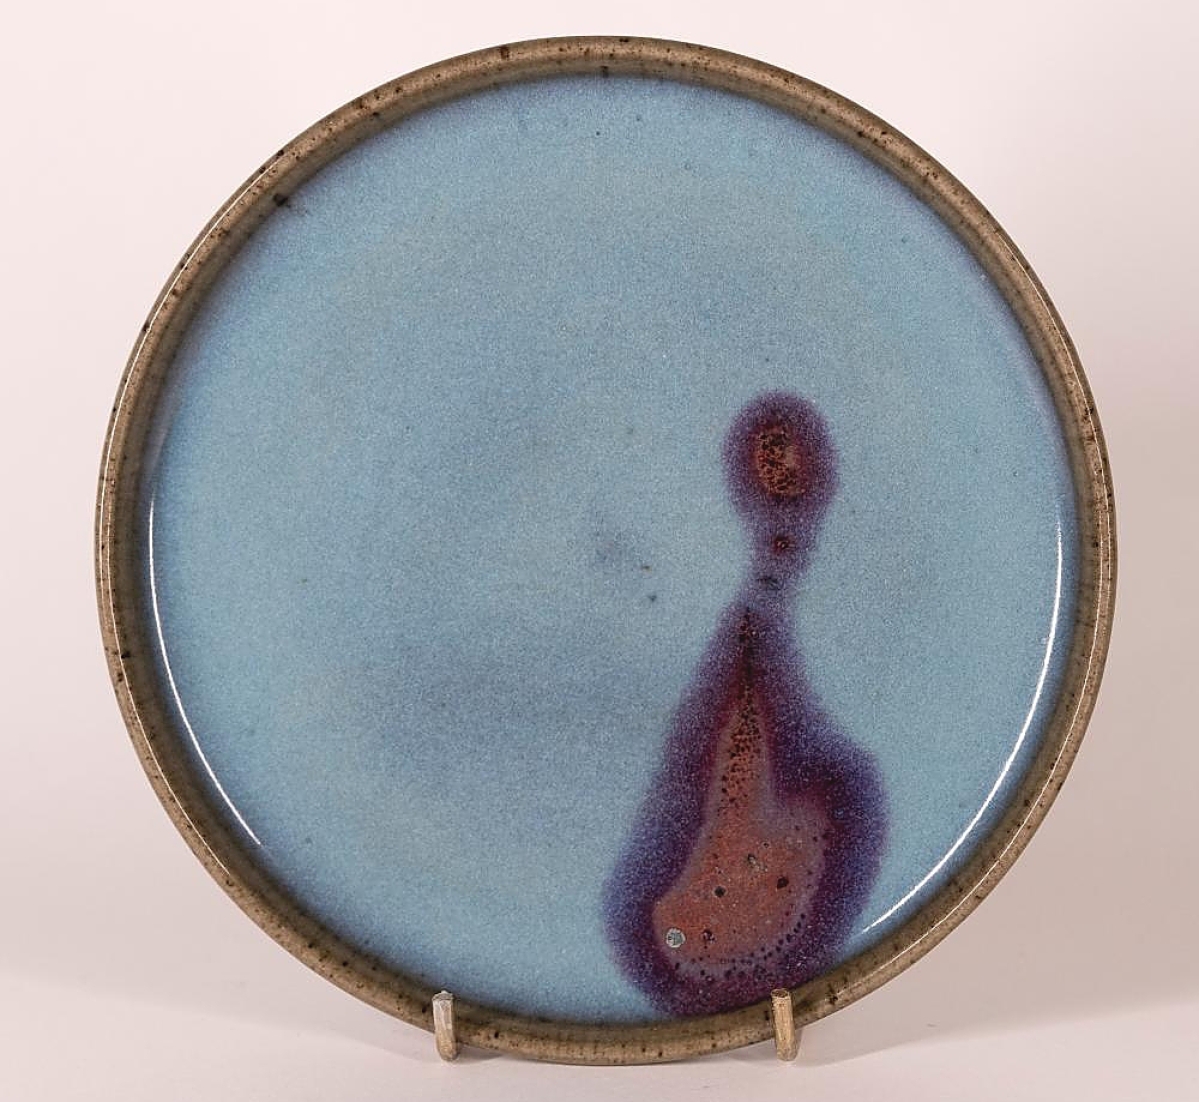 “That was one of my favorite things,” Keno said of this Song dynasty (90-1127) Jun ware purple splashed tripod dish, which is a rare form and featured a thick glaze. It sold to a buyer in Massachusetts for $12,160, the second highest price in the sale ($1,5/3,000).